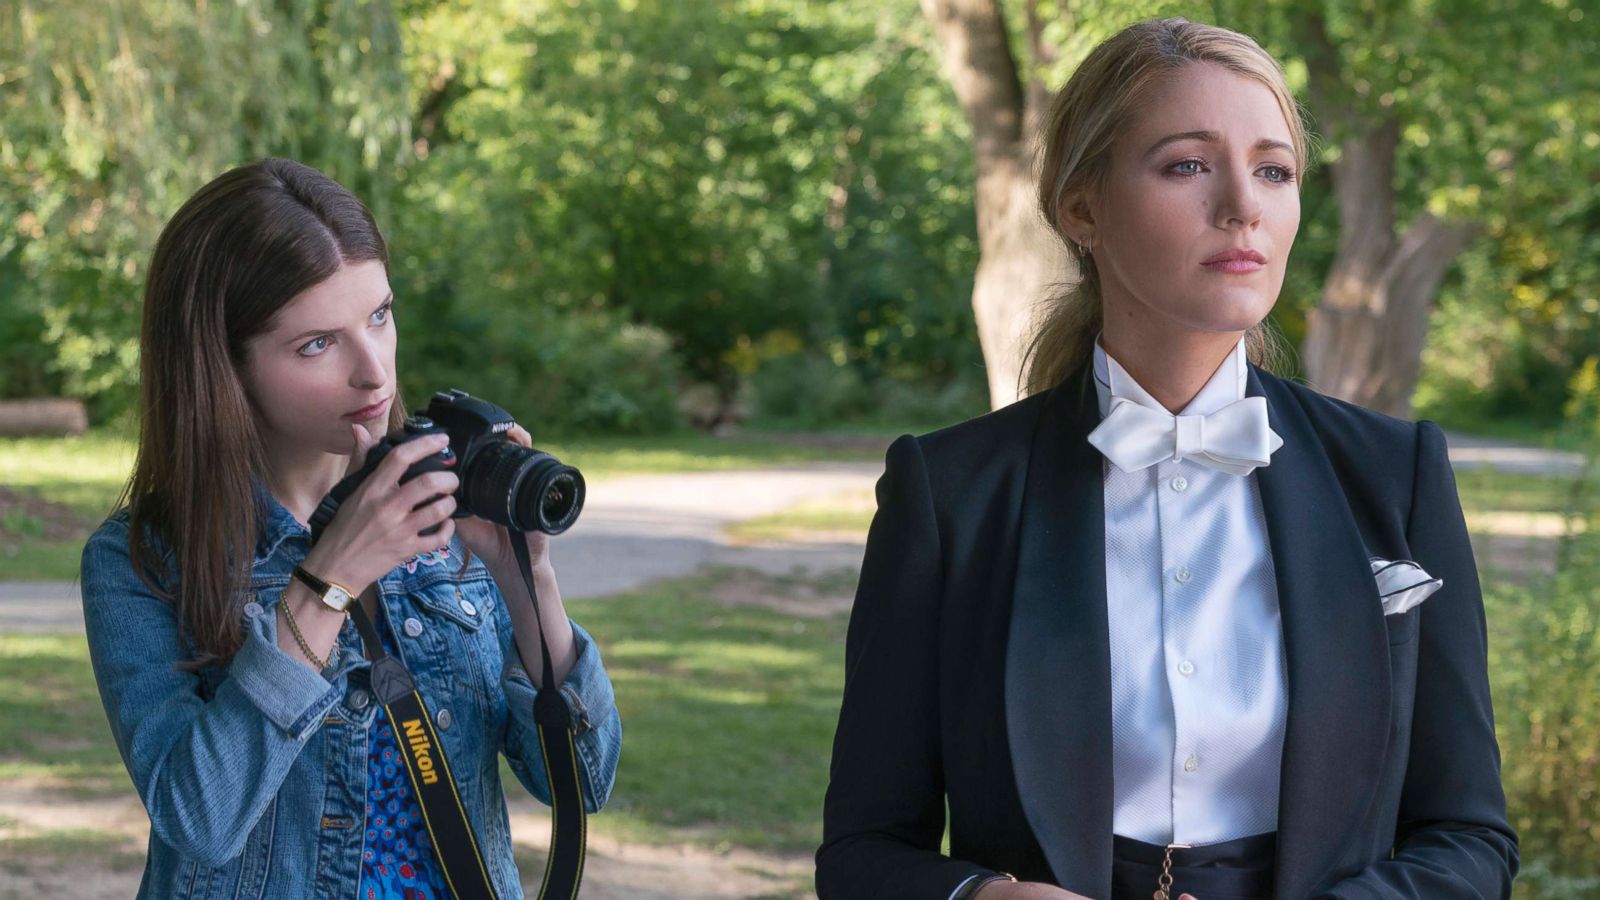 A Simple Favor Stars Blake Lively Anna Kendrick And Henry Golding On How They Re Different From Their Characters Who S A Better Kisser Abc News